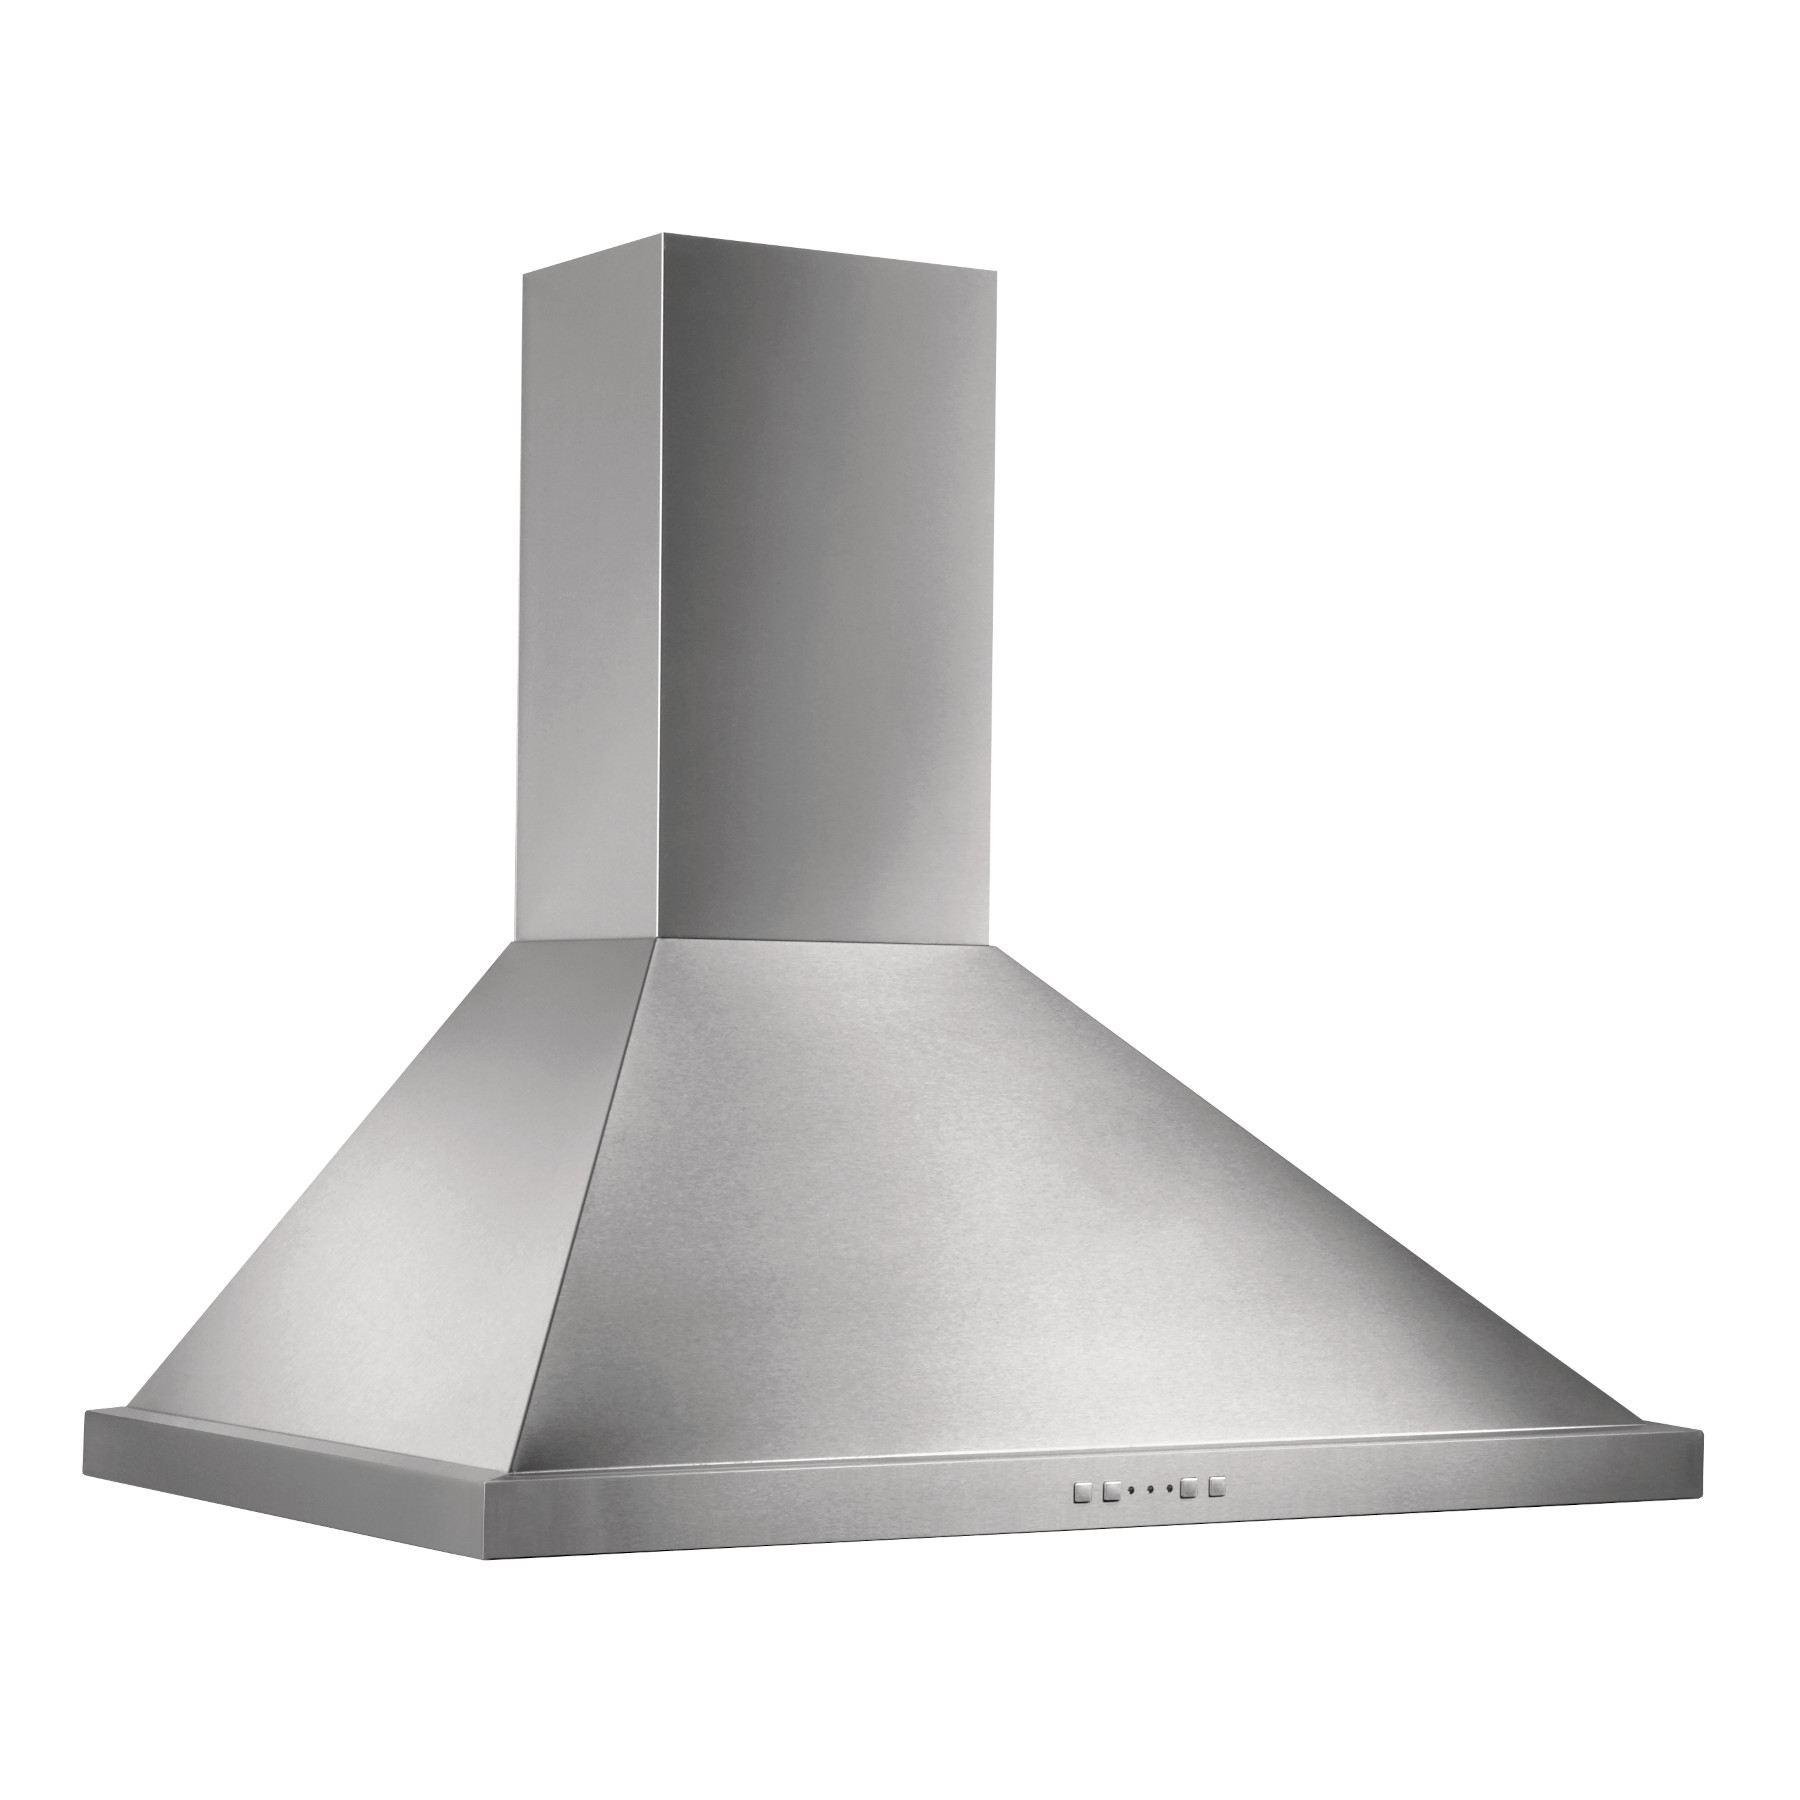 **DISCONTINUED** Broan® 36-Inch Convertible Canopy Wall-Mount Range Hood w/ Heat Sentry®, 500 CFM, Stainless Steel